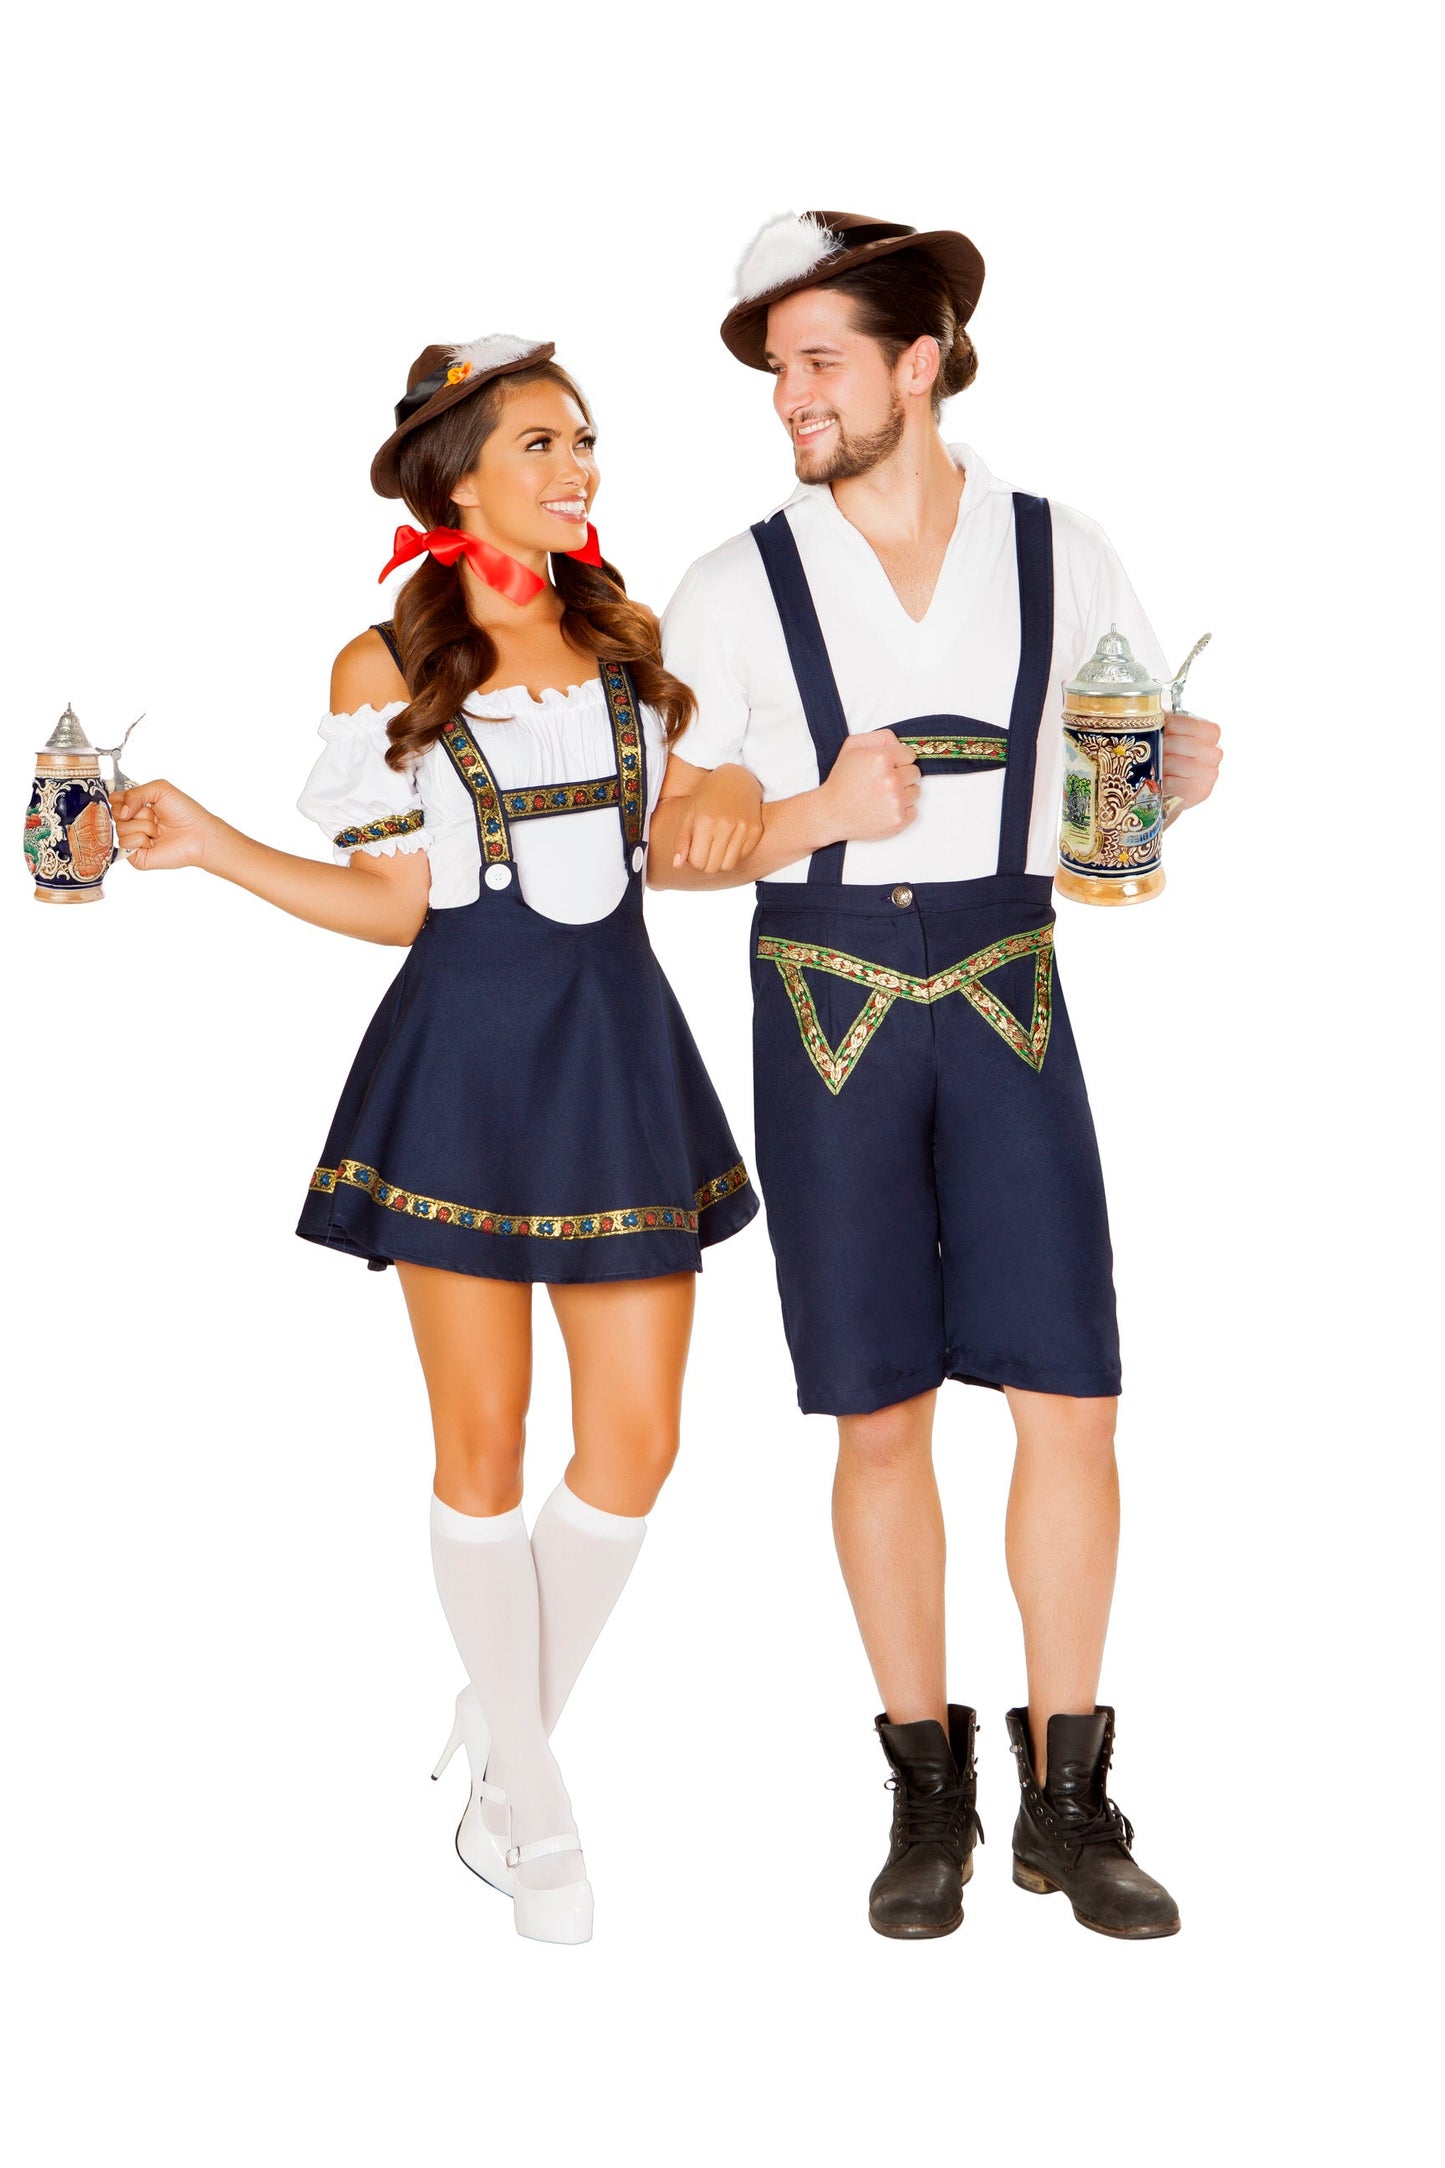 4884 - Roma Costume 3pc Bavarian Beauty Serving Wench Couples Costume